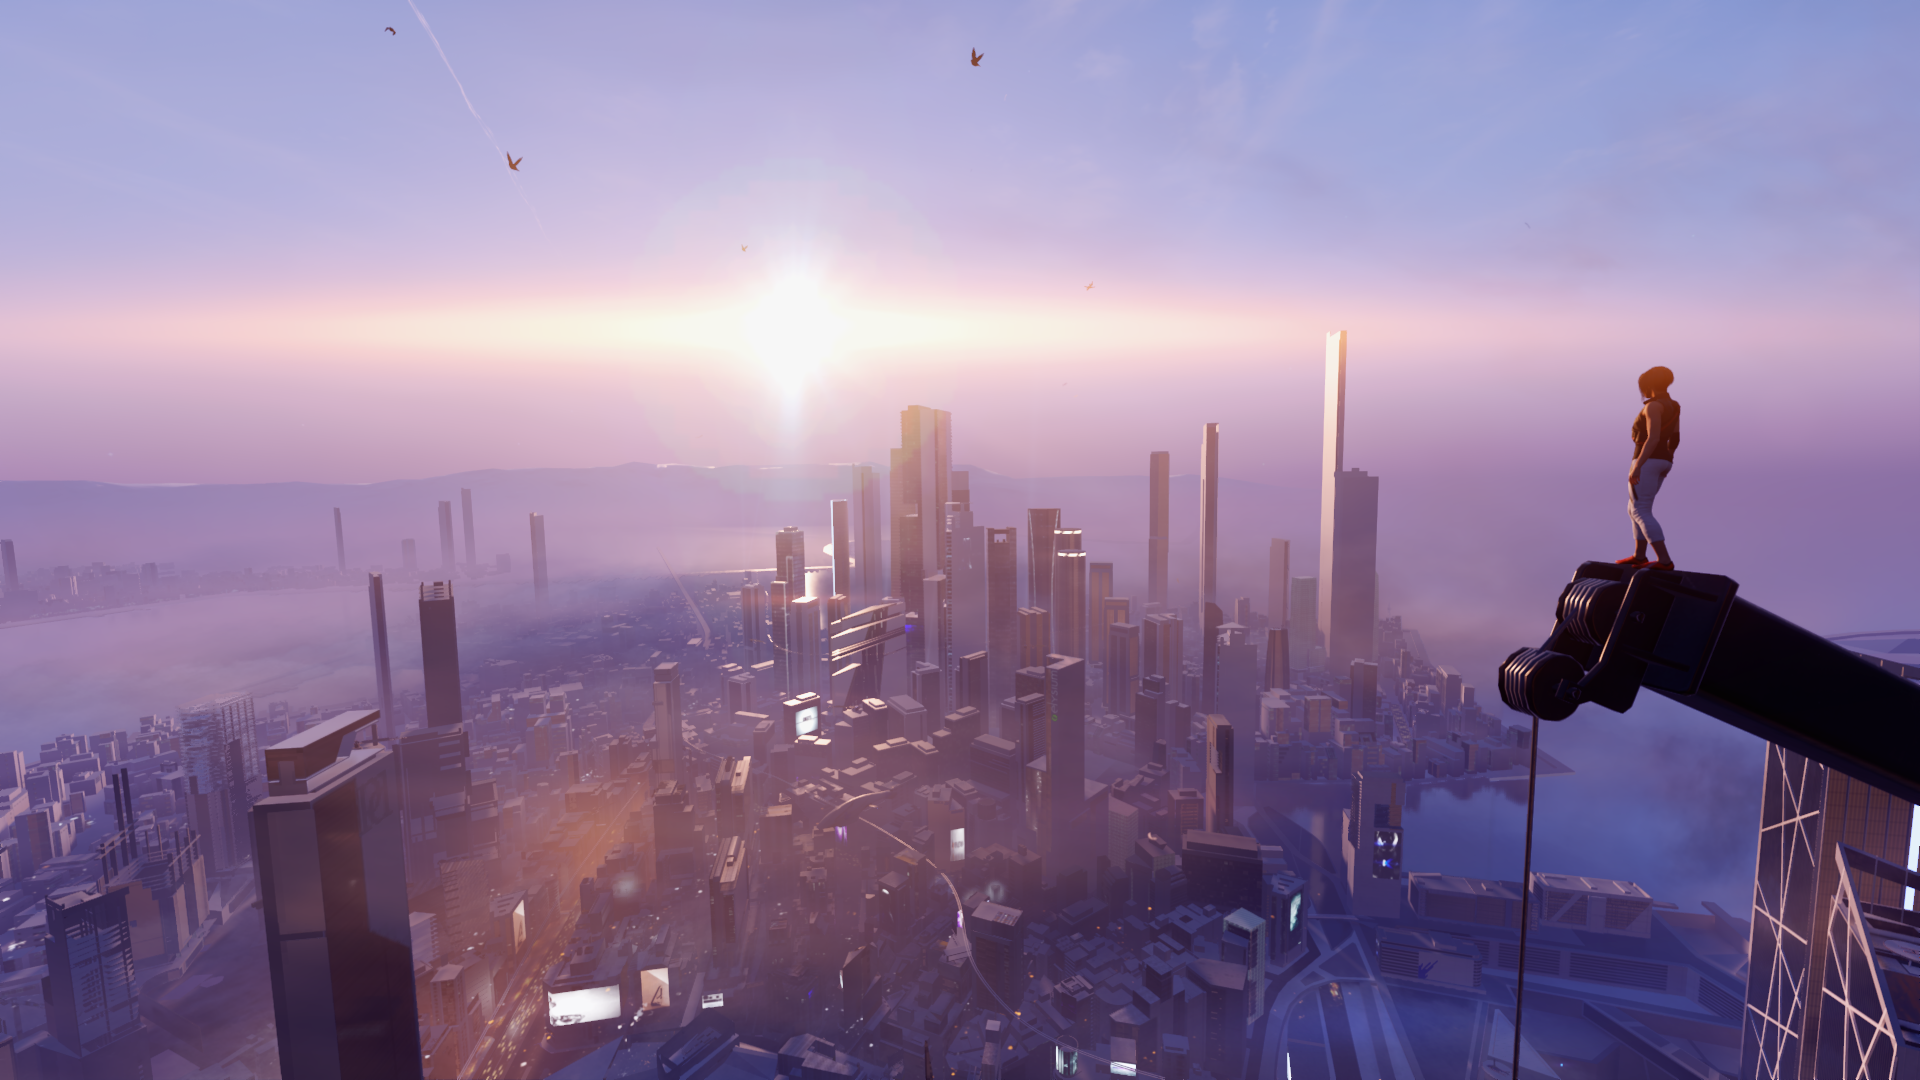 General 1920x1080 Mirror's Edge Catalyst urban futurism PC gaming screen shot cityscape Mirror's Edge video game art city video games sky building skyscraper video game characters CGI video game girls standing clouds sunlight Sun